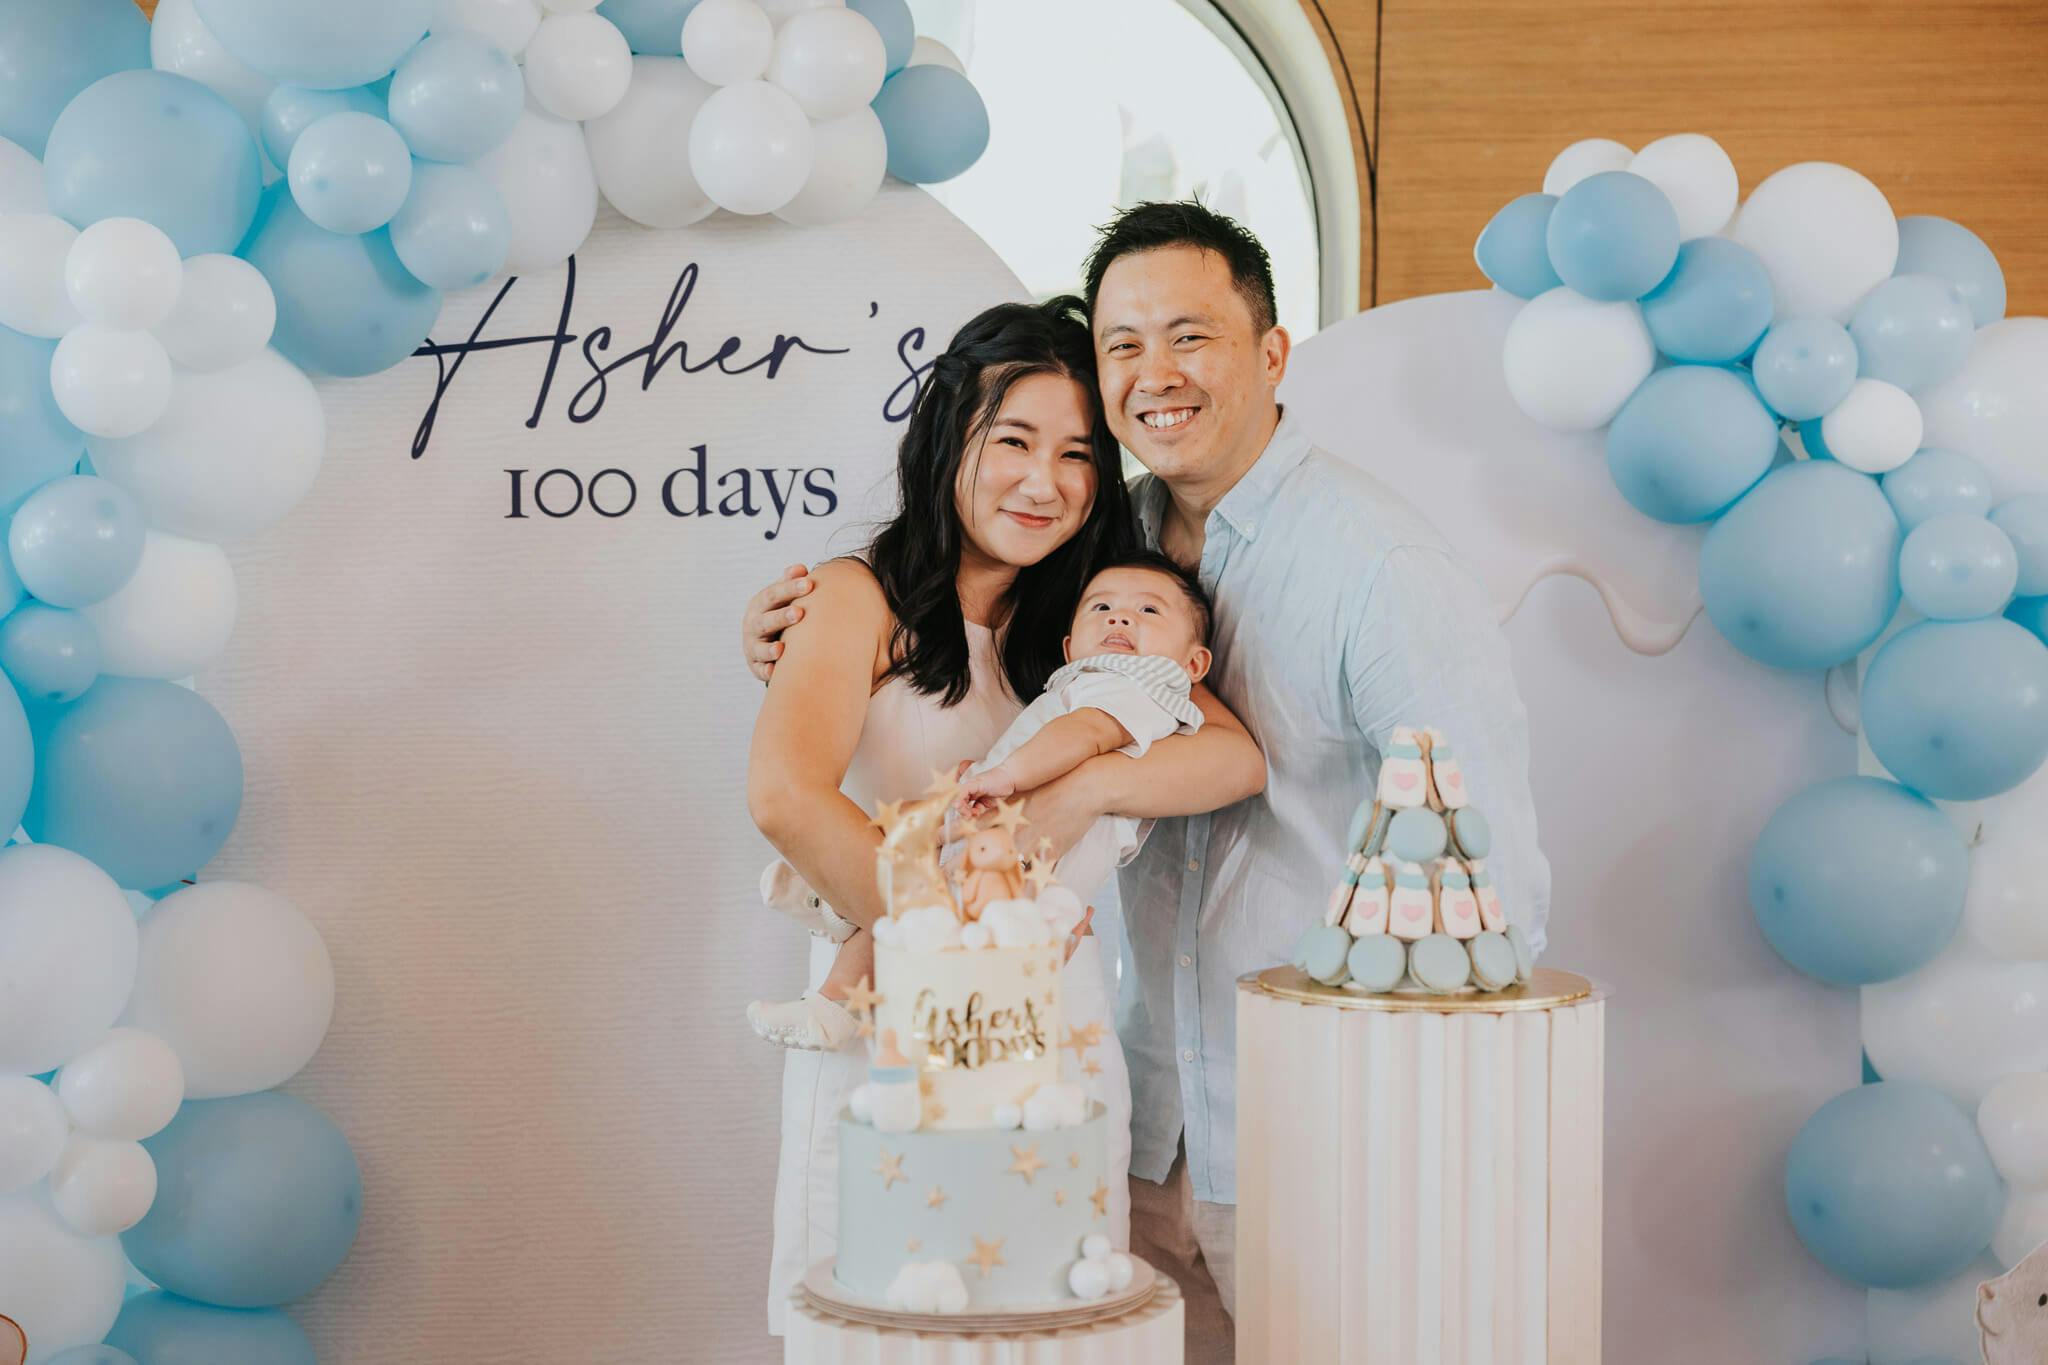 young mom and dad hugging daughter for her 100 day baby birthday party celebration